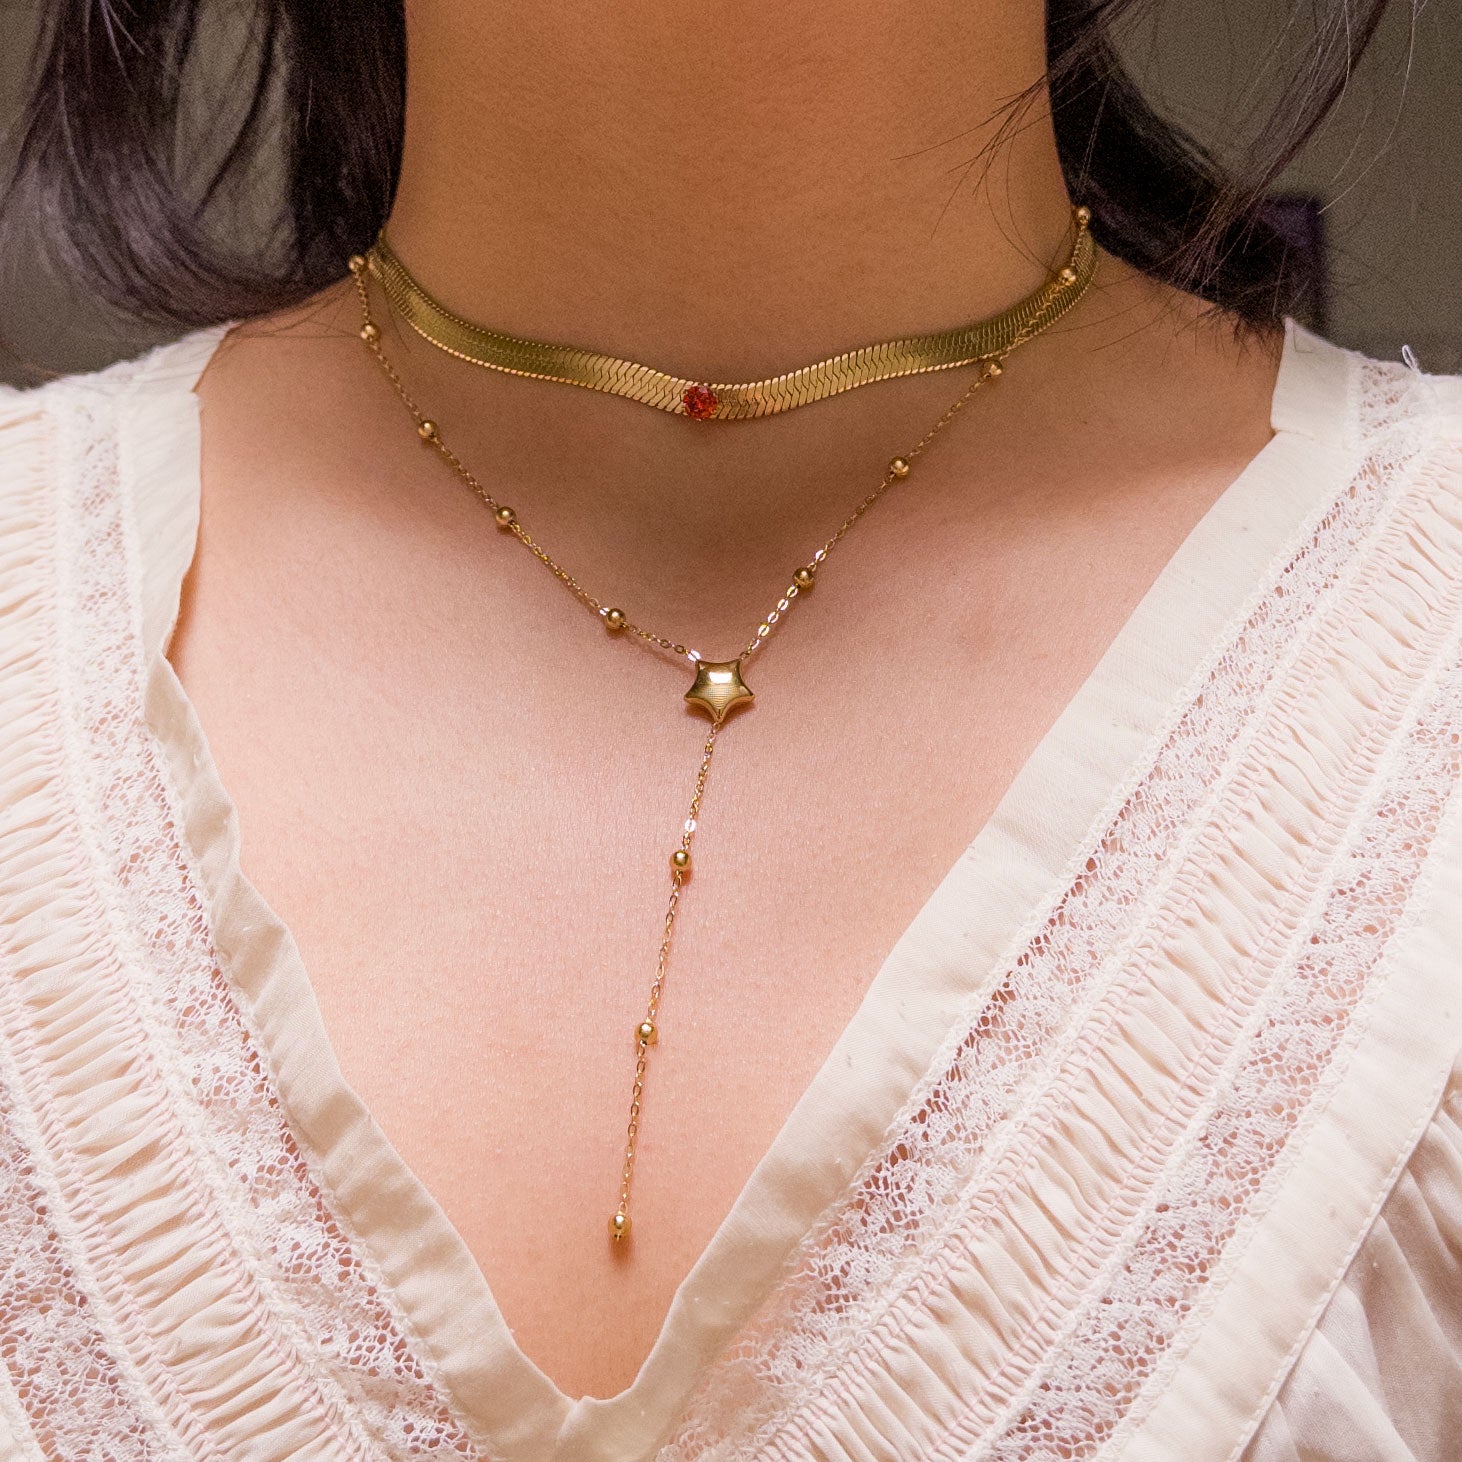 Stainless steel gold colored snake chain choker/necklace featuring a ruby red cubic zirconia gem in the center. Can be dress up or down. Perfect for layering and everyday wear. 